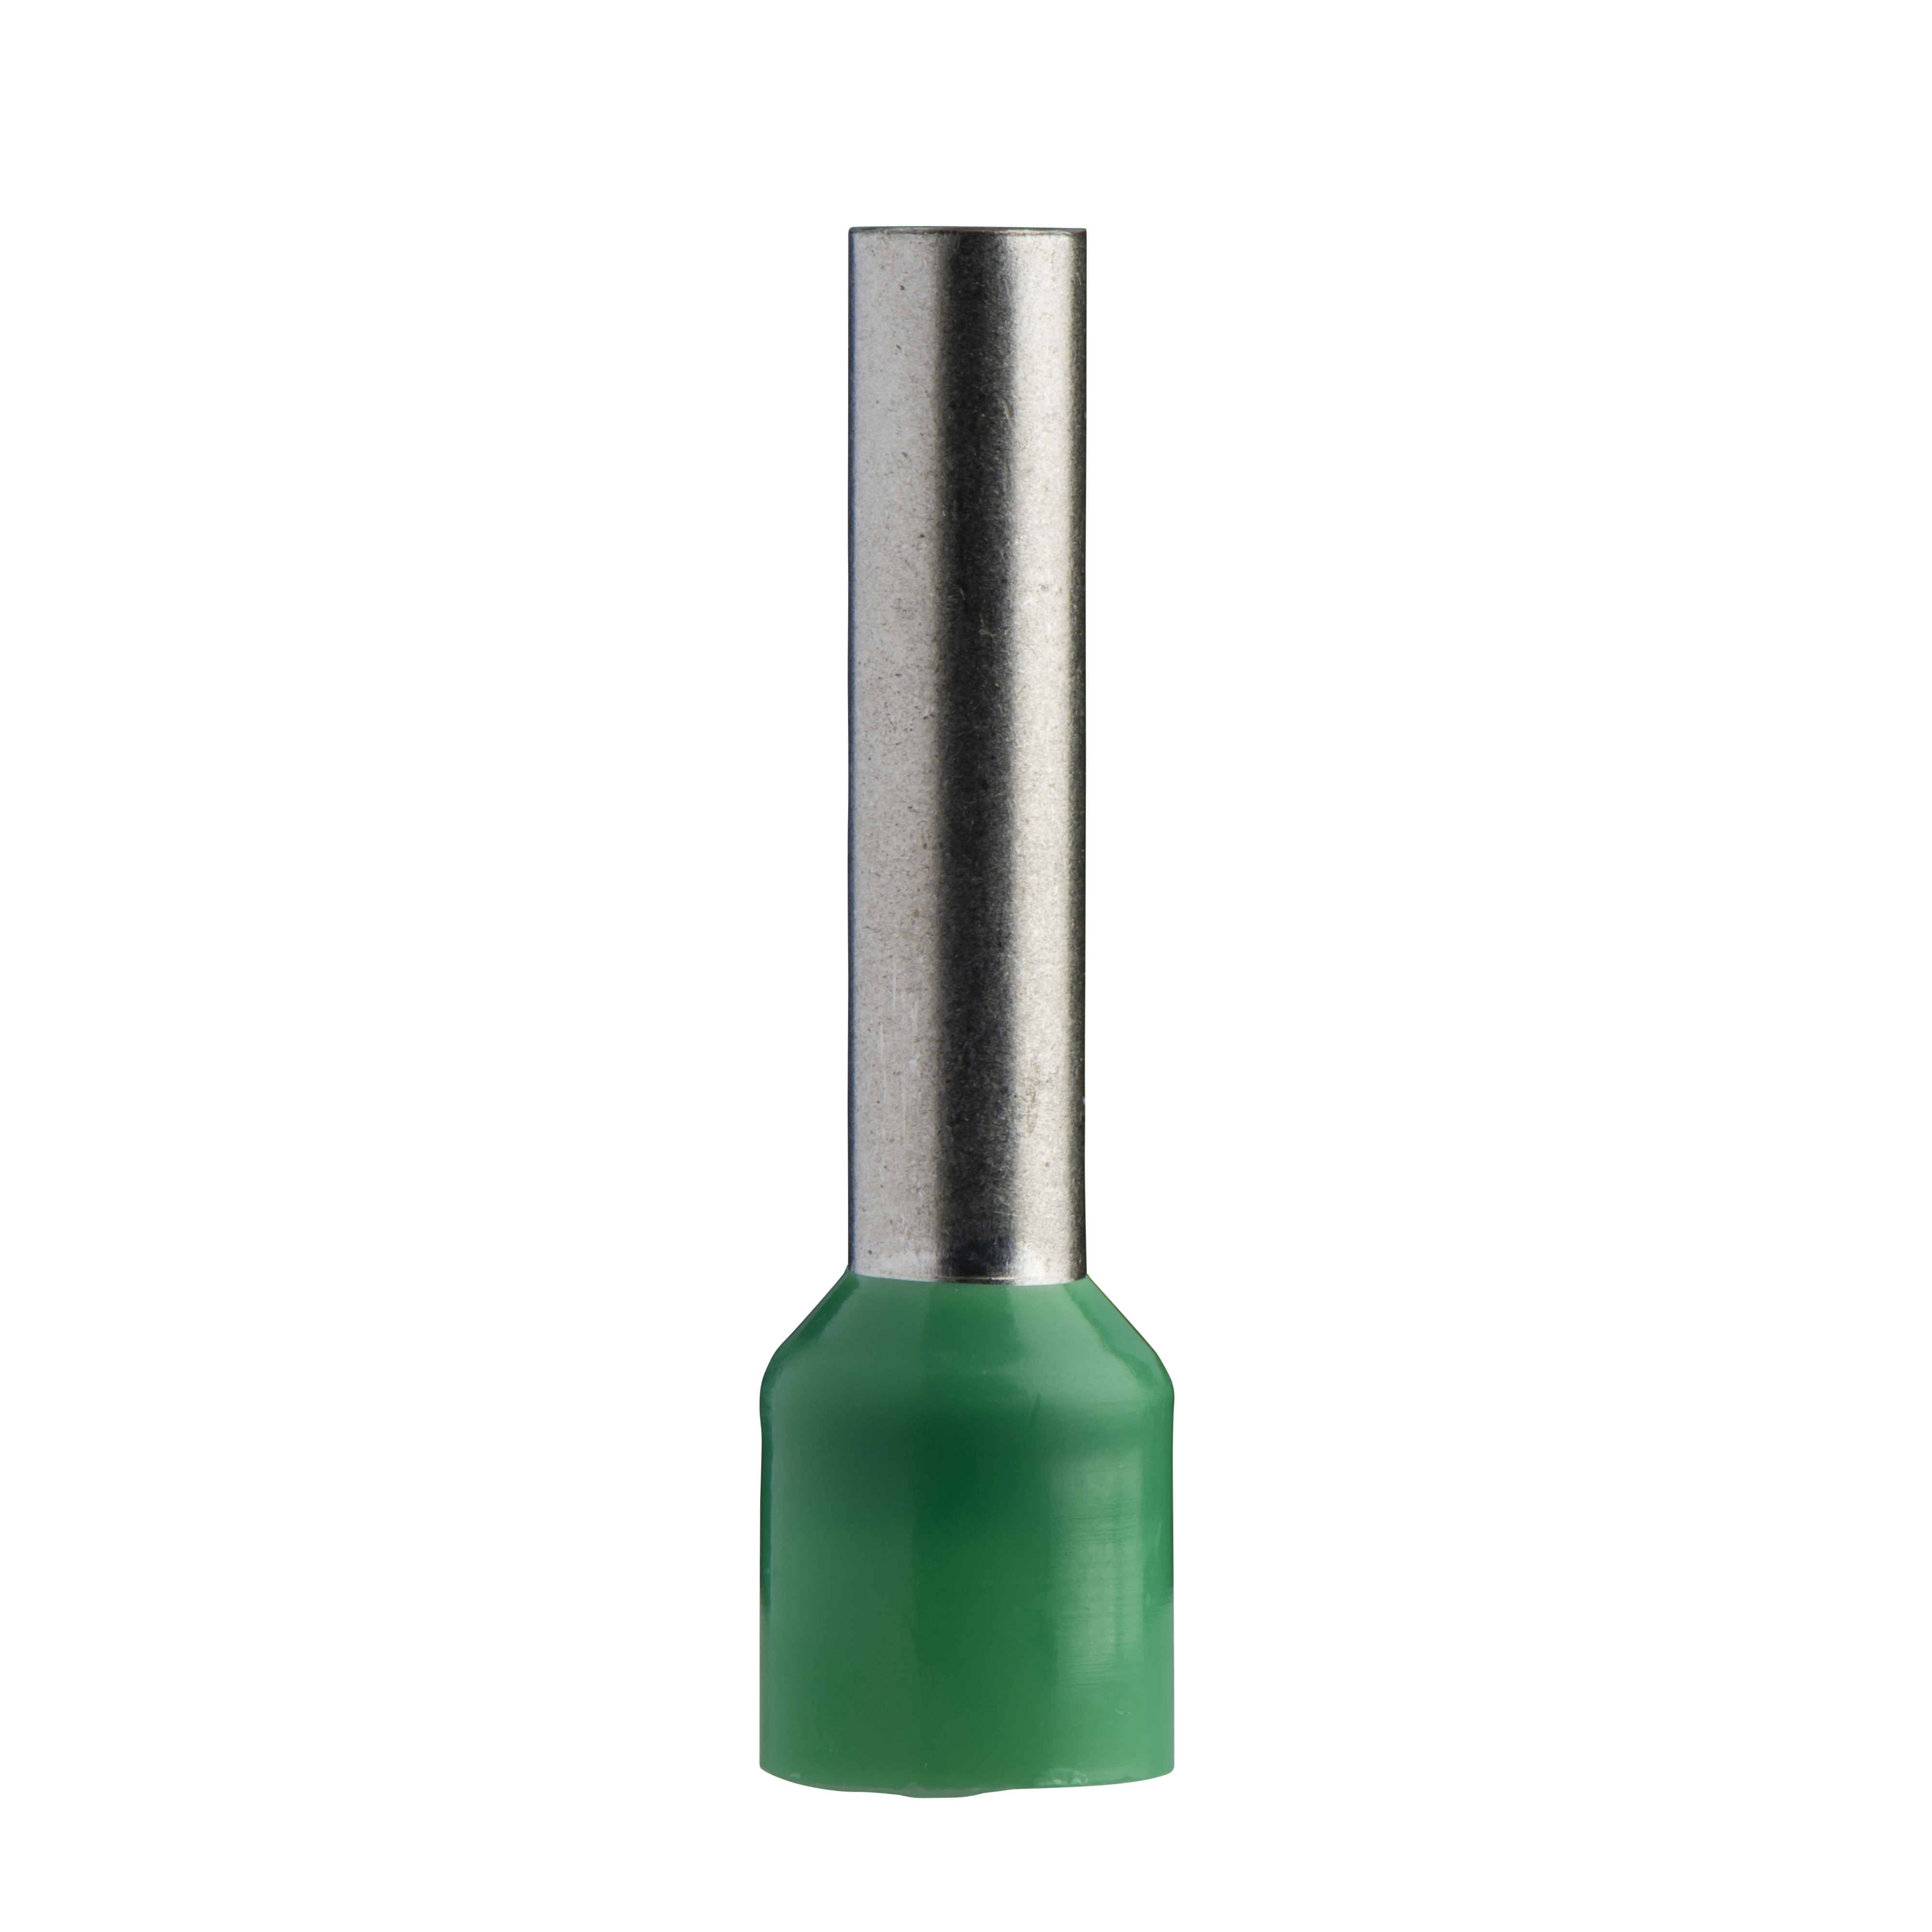 Cable ends, Linergy TR cable ends, single conductor, green, 6mm², Ferrules with sleeve, long size, 10 sets of 100